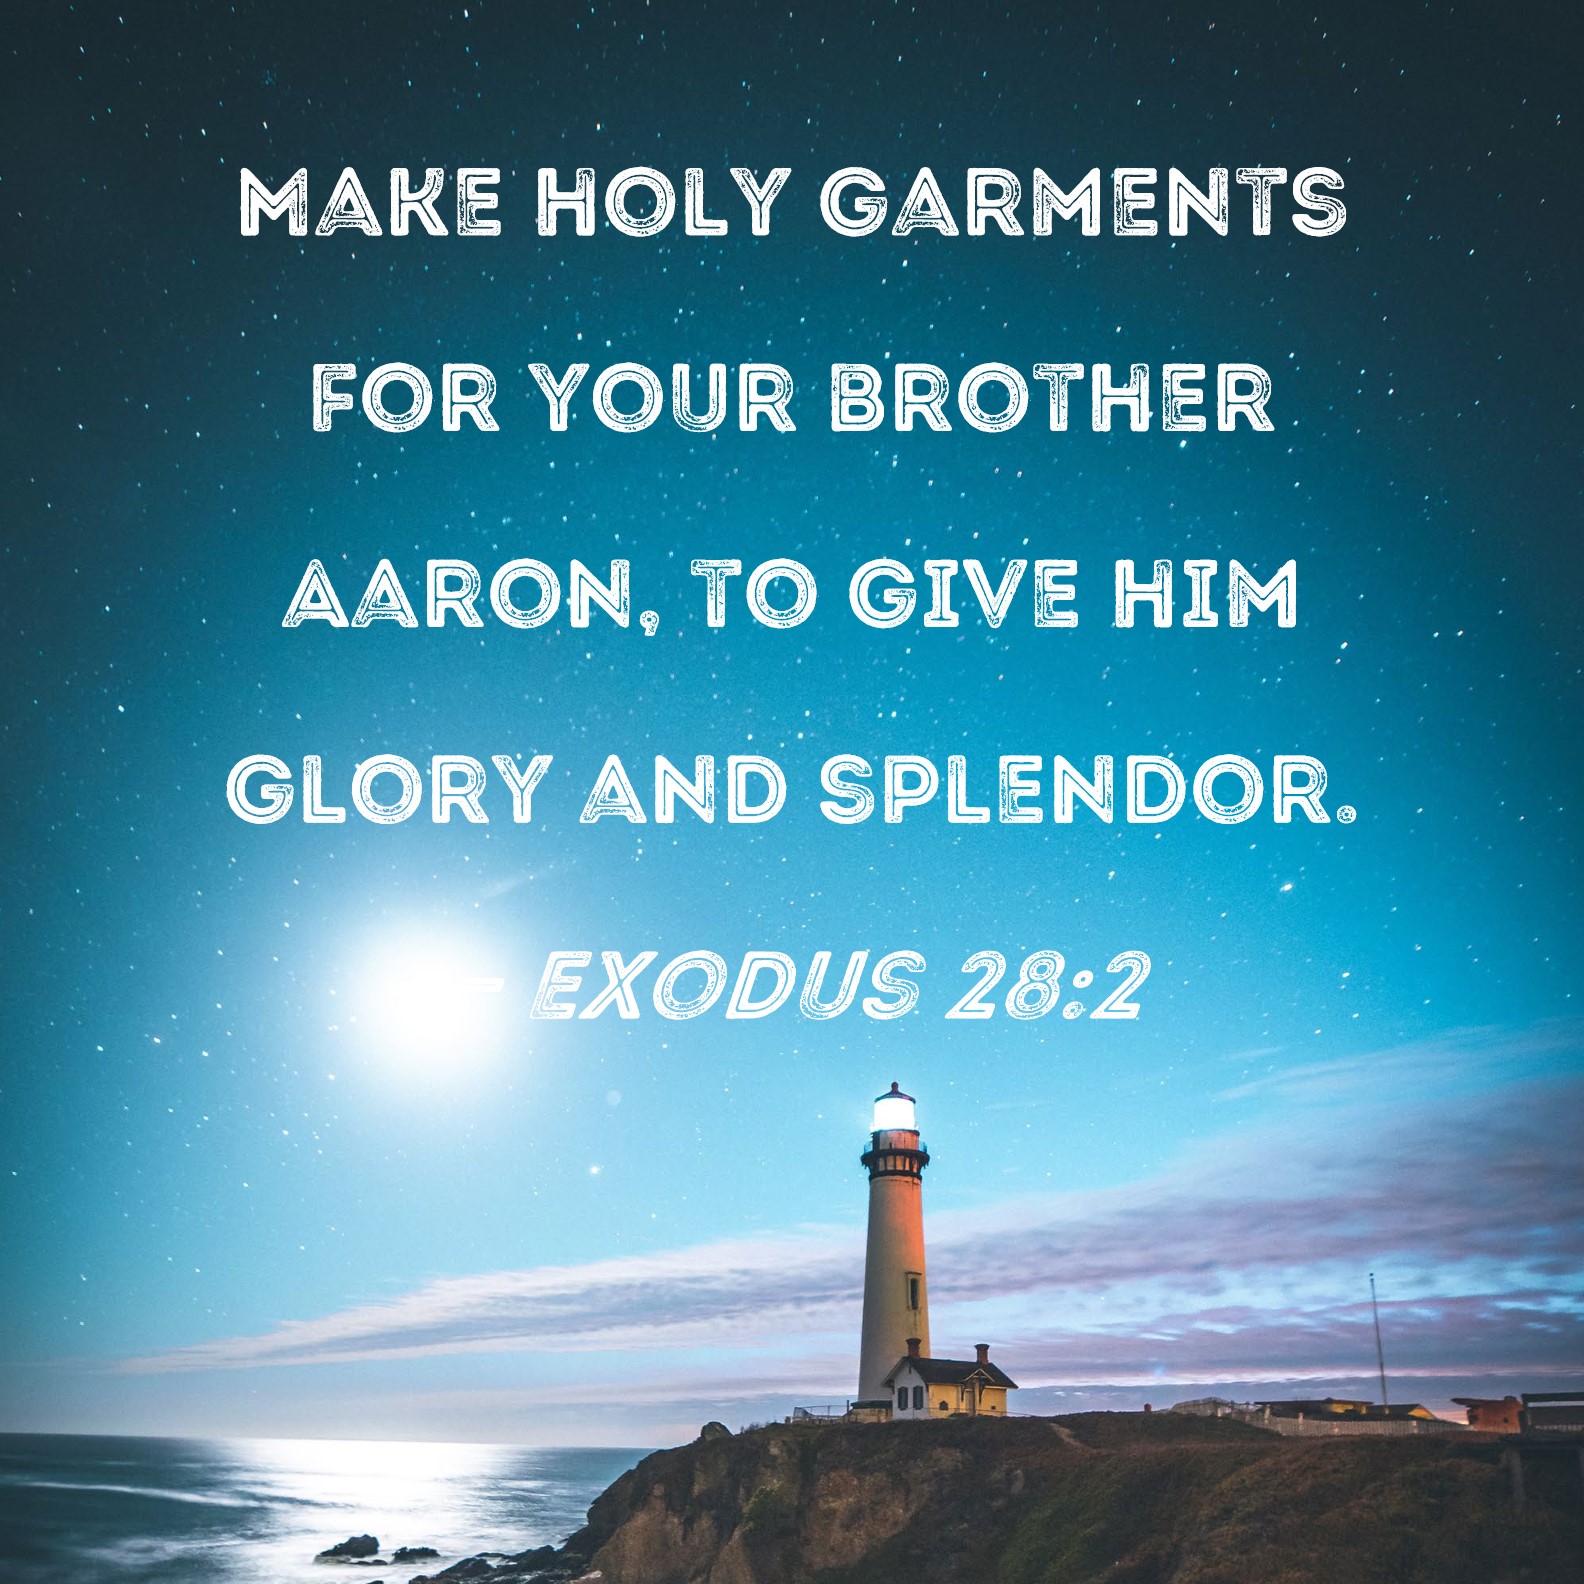 Exodus 28:2 Make holy garments for your brother Aaron, to give him glory  and splendor.